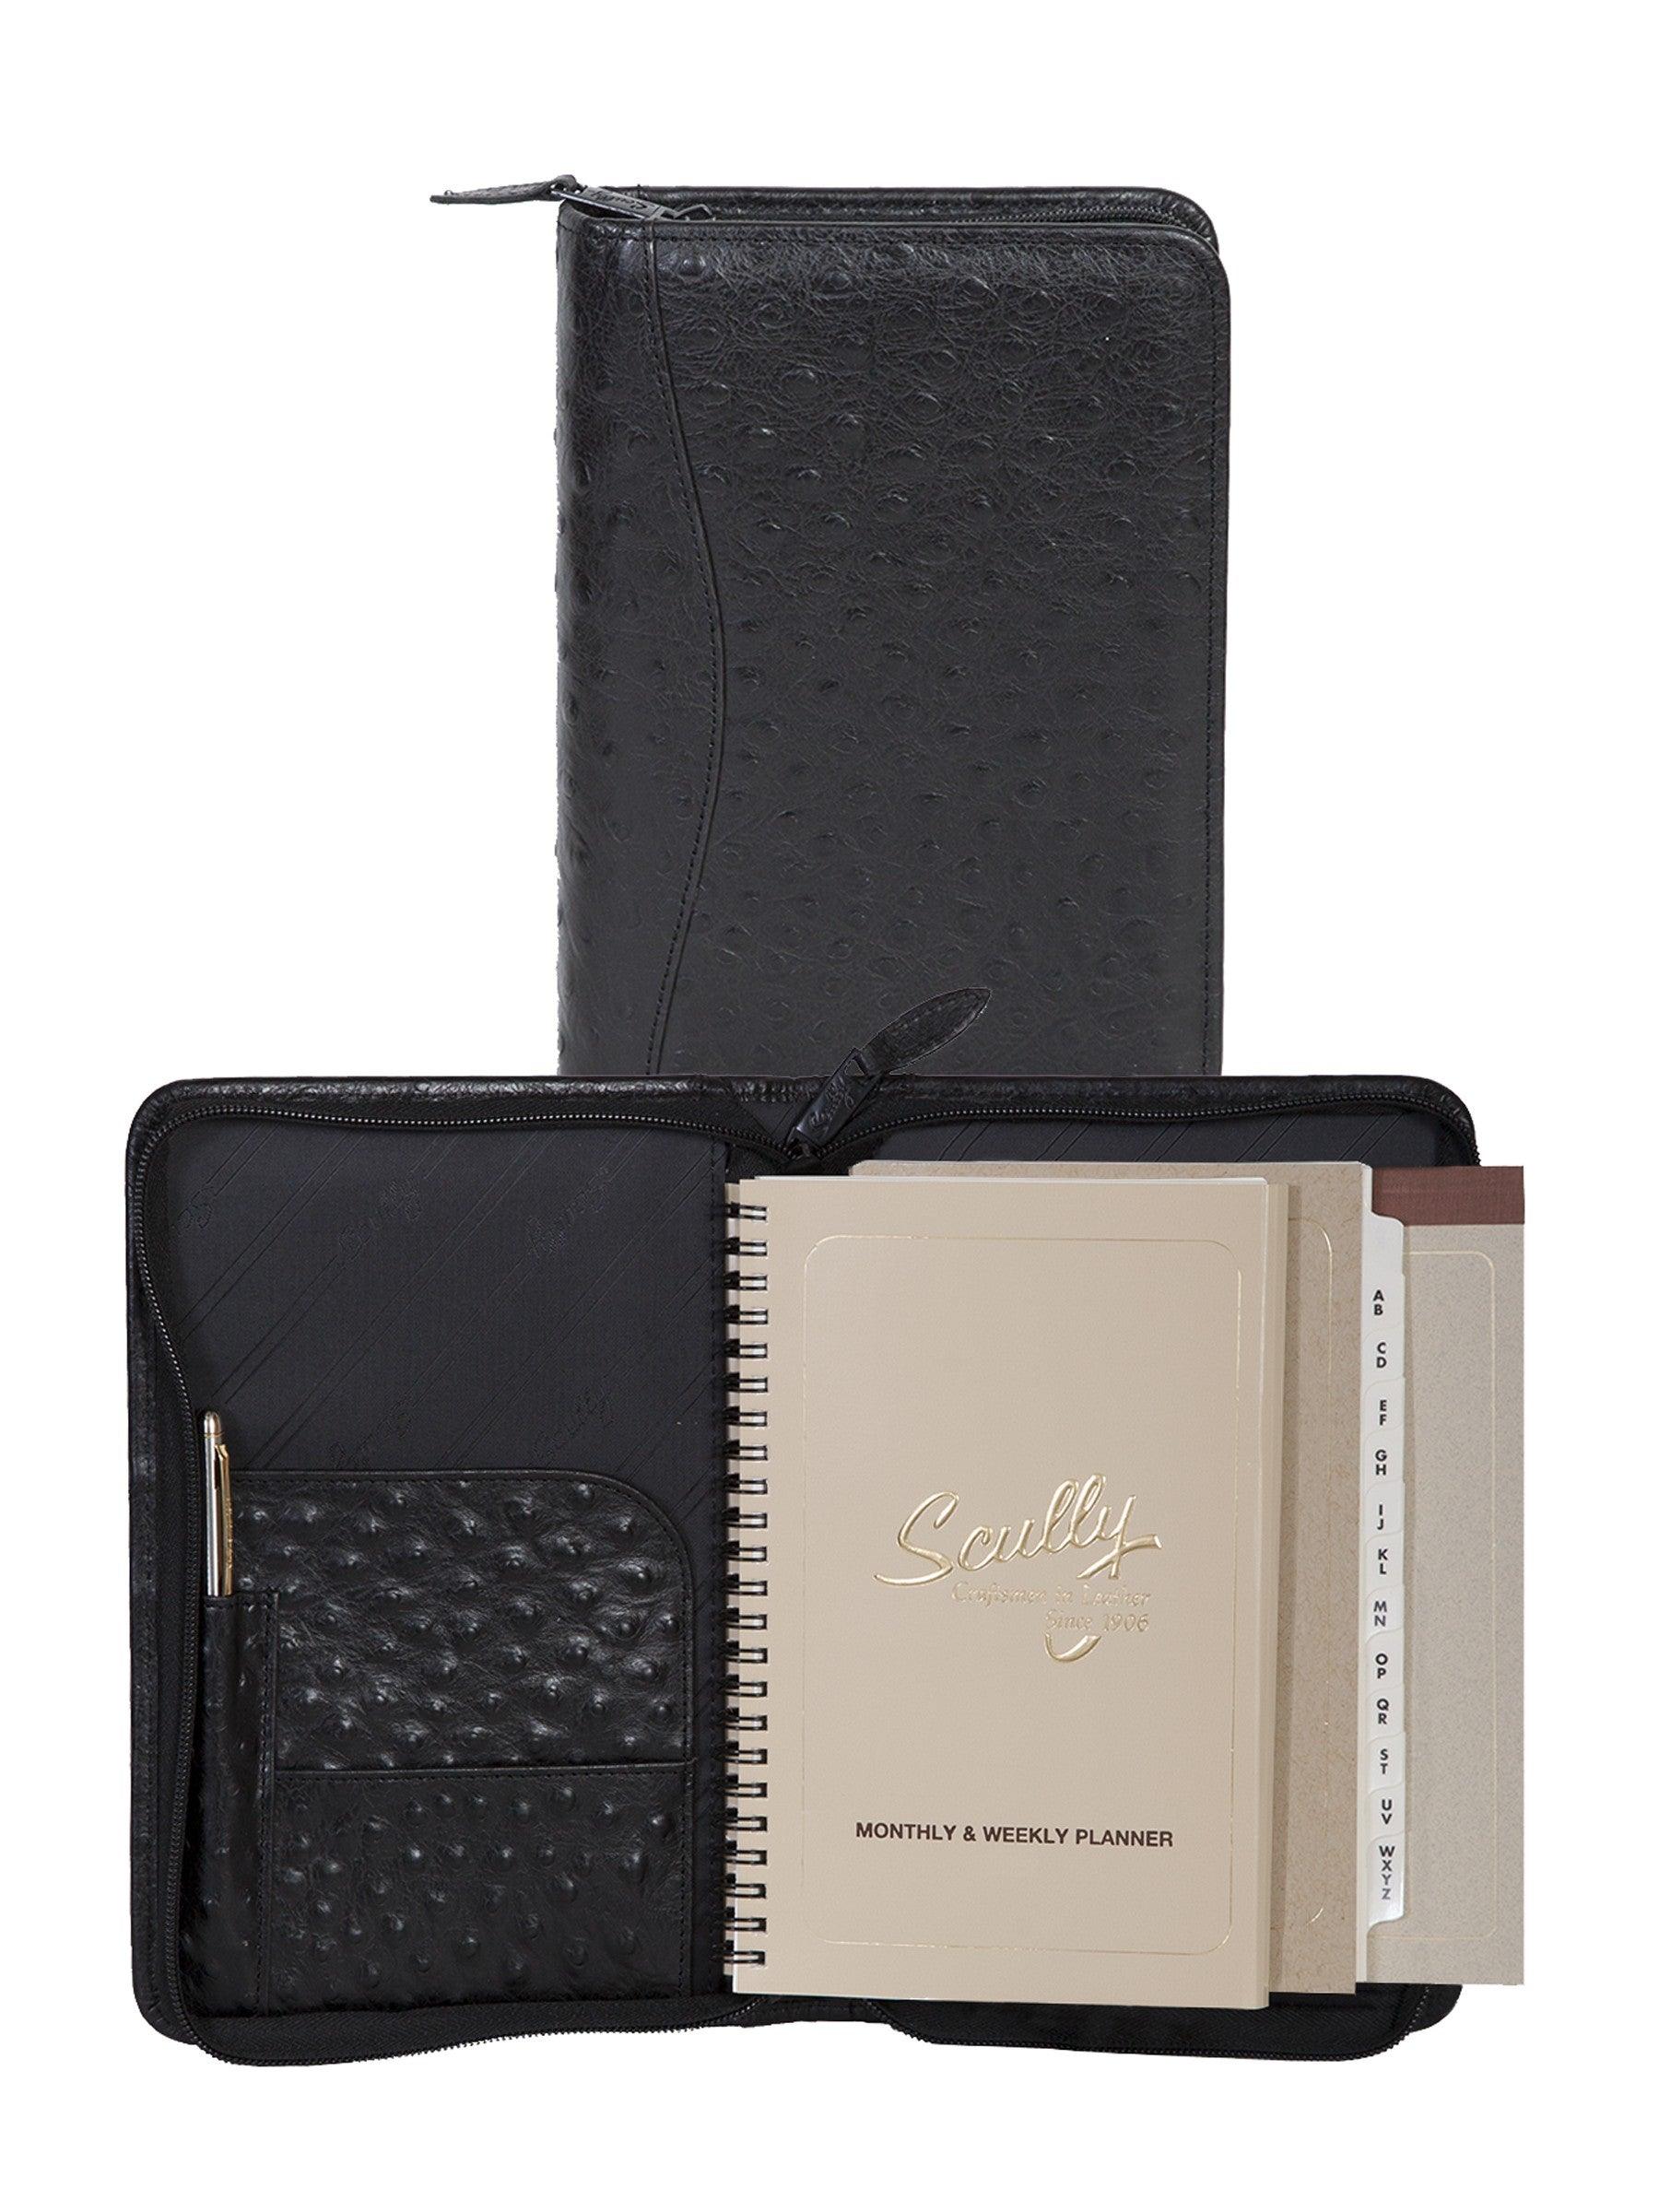 Scully Leather zip weekly planner - Flyclothing LLC